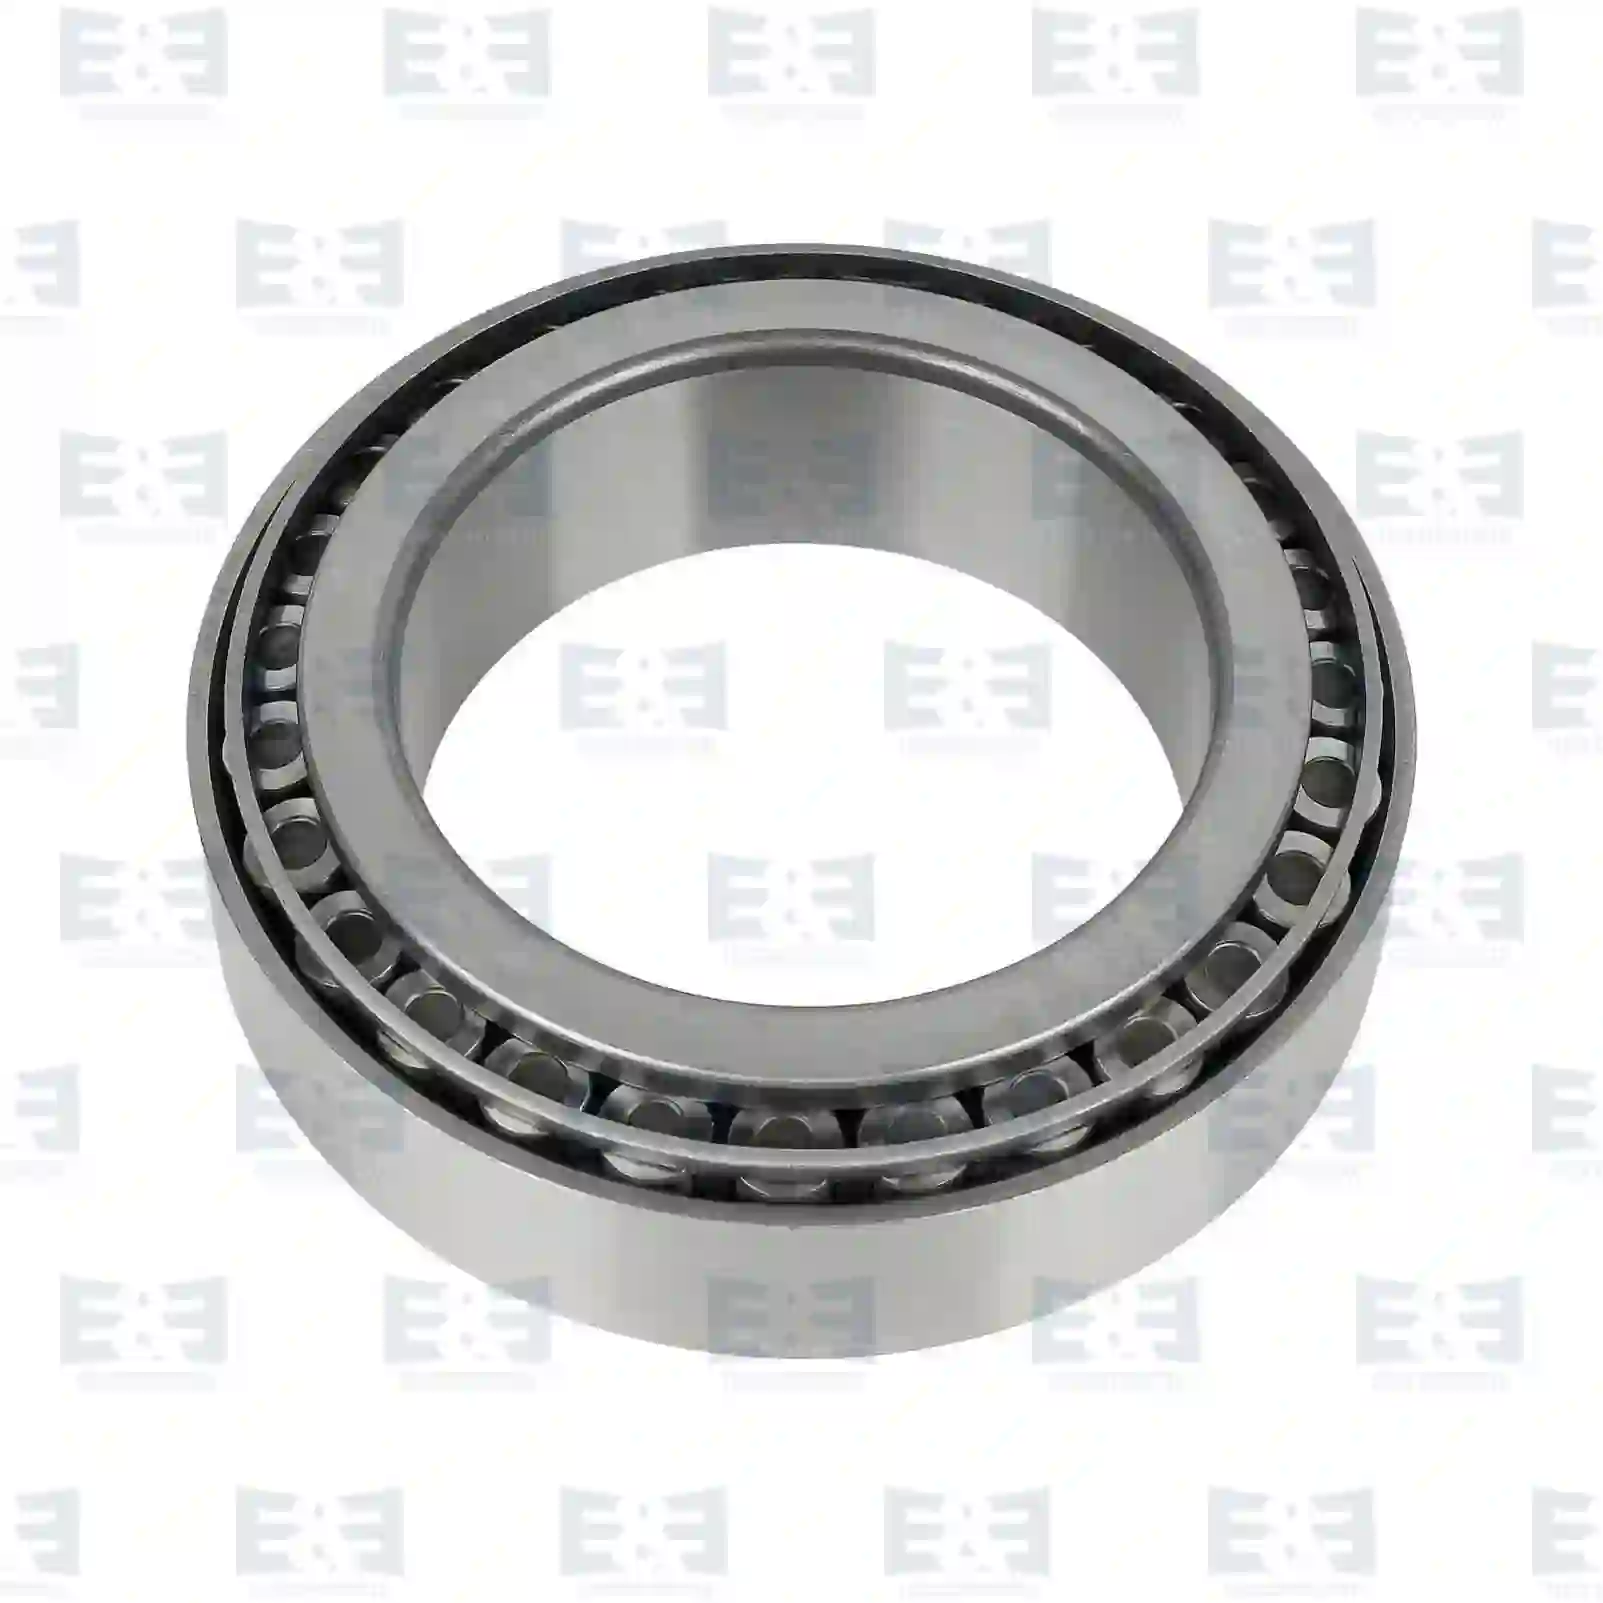 Bearings Tapered roller bearing, EE No 2E2286212 ,  oem no:0528430, 0676987, 528430, 676987, 005092802, 01104923, 01104923, 1104923, 06324990036, 06324990123, 81934200185, 81934200036, 87524601503, N1011053455, 0009809602, 0029818405, 0029819005, 0039818605, 0209814805, 3869817705, 0023432871, 676987, WHT006376, ZG03023-0008 E&E Truck Spare Parts | Truck Spare Parts, Auotomotive Spare Parts